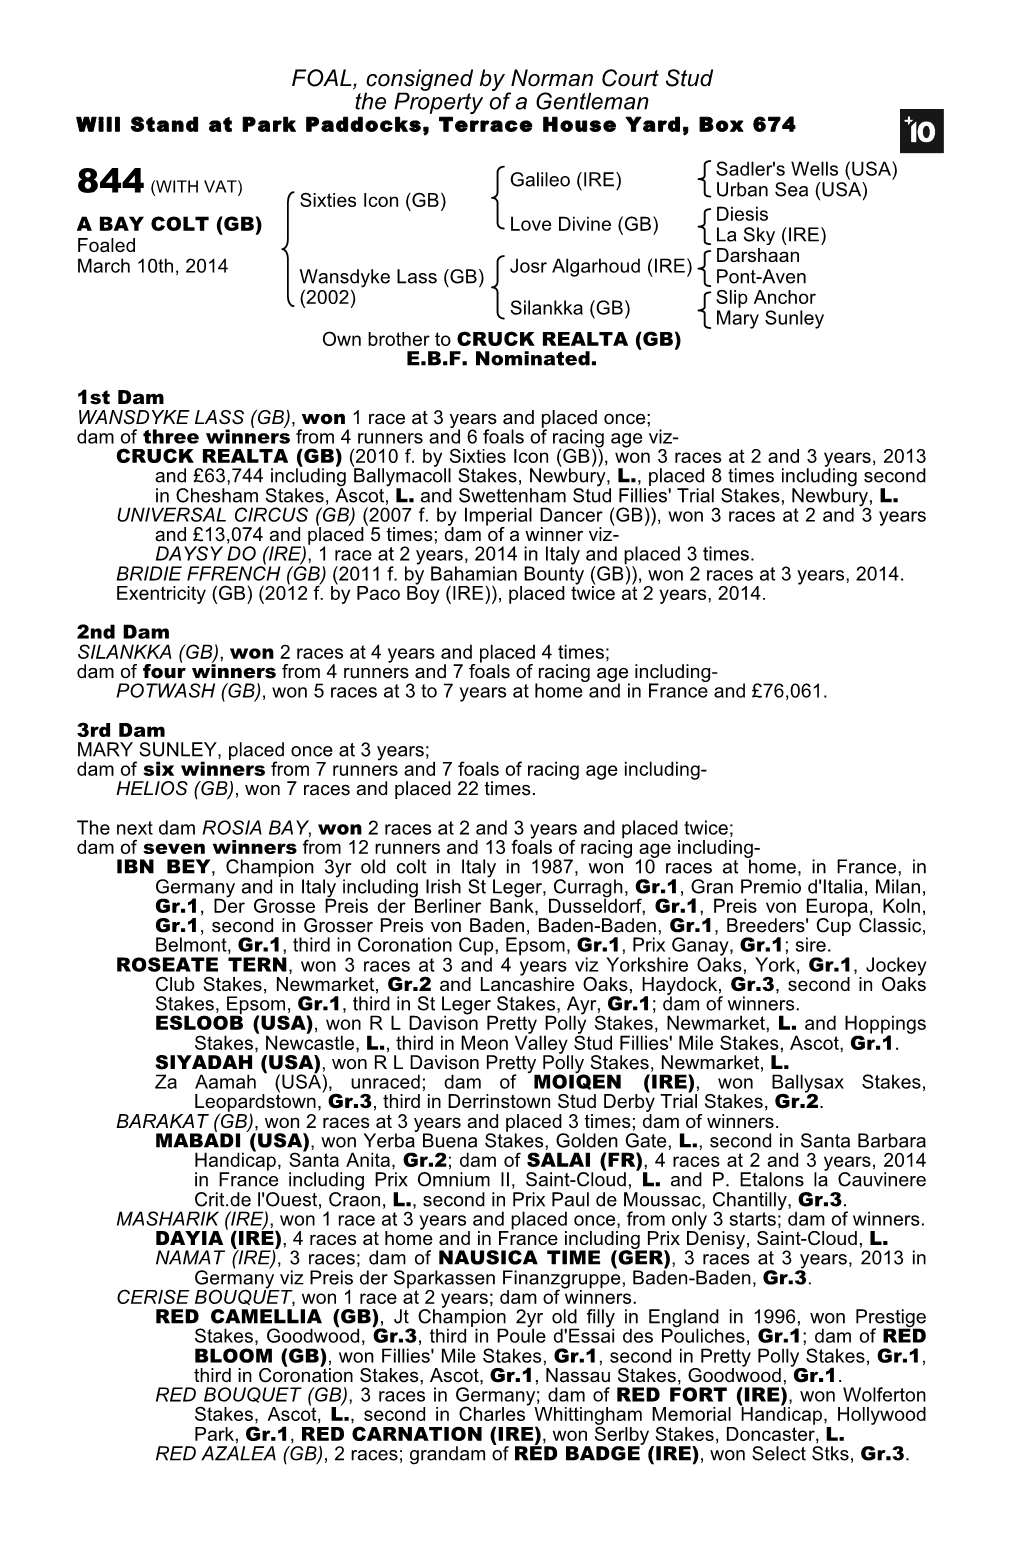 FOAL, Consigned by Norman Court Stud the Property of a Gentleman Will Stand at Park Paddocks, Terrace House Yard, Box 674